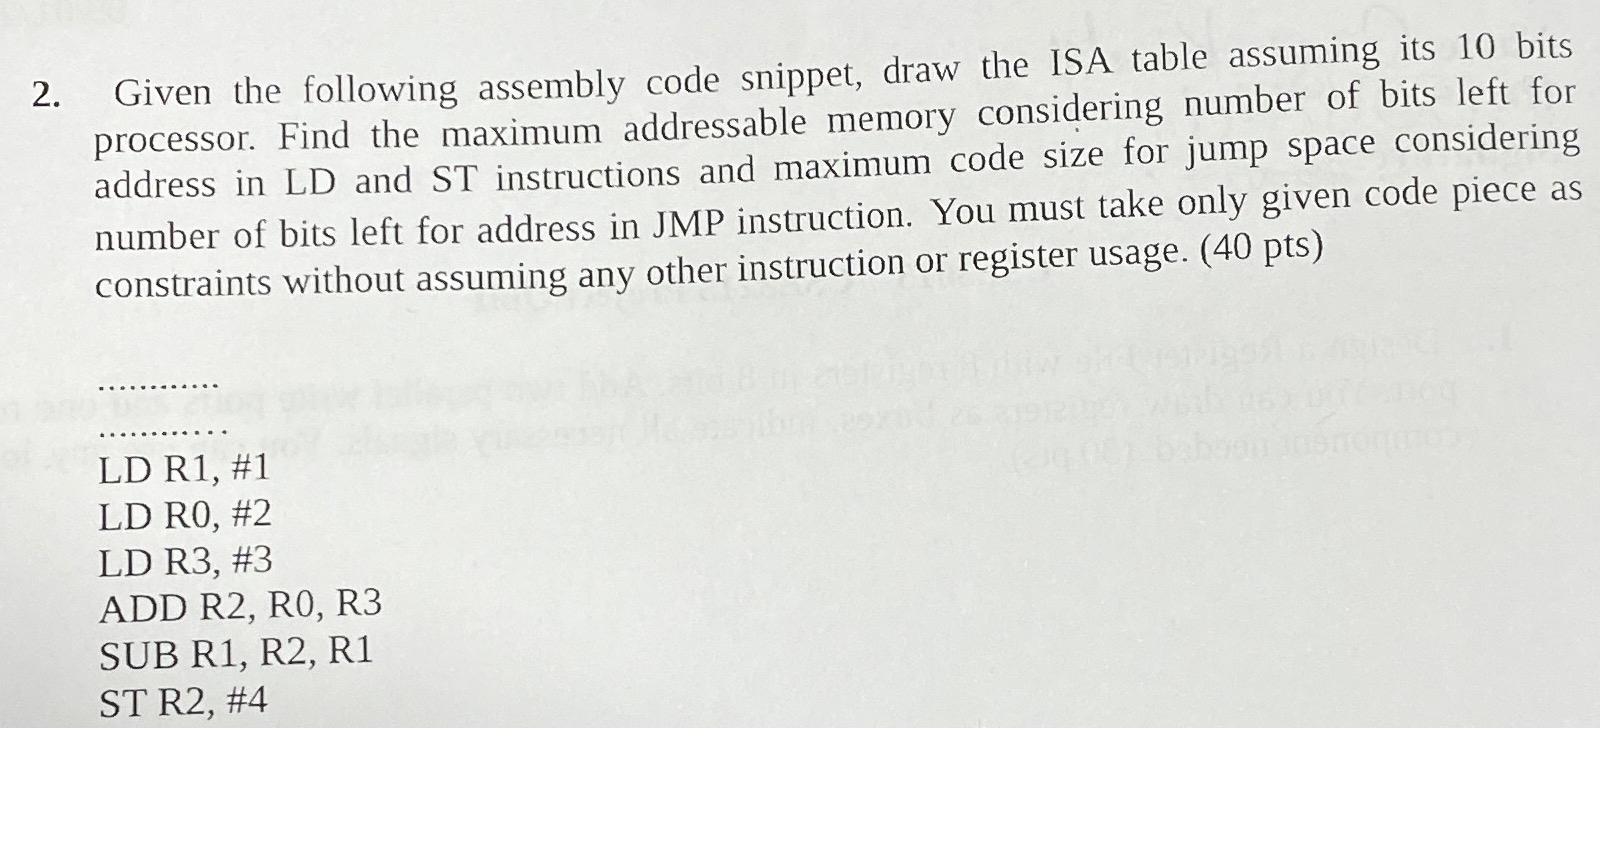 2. Given the following assembly code snippet, draw the ISA table assuming its 10 bits processor. Find the